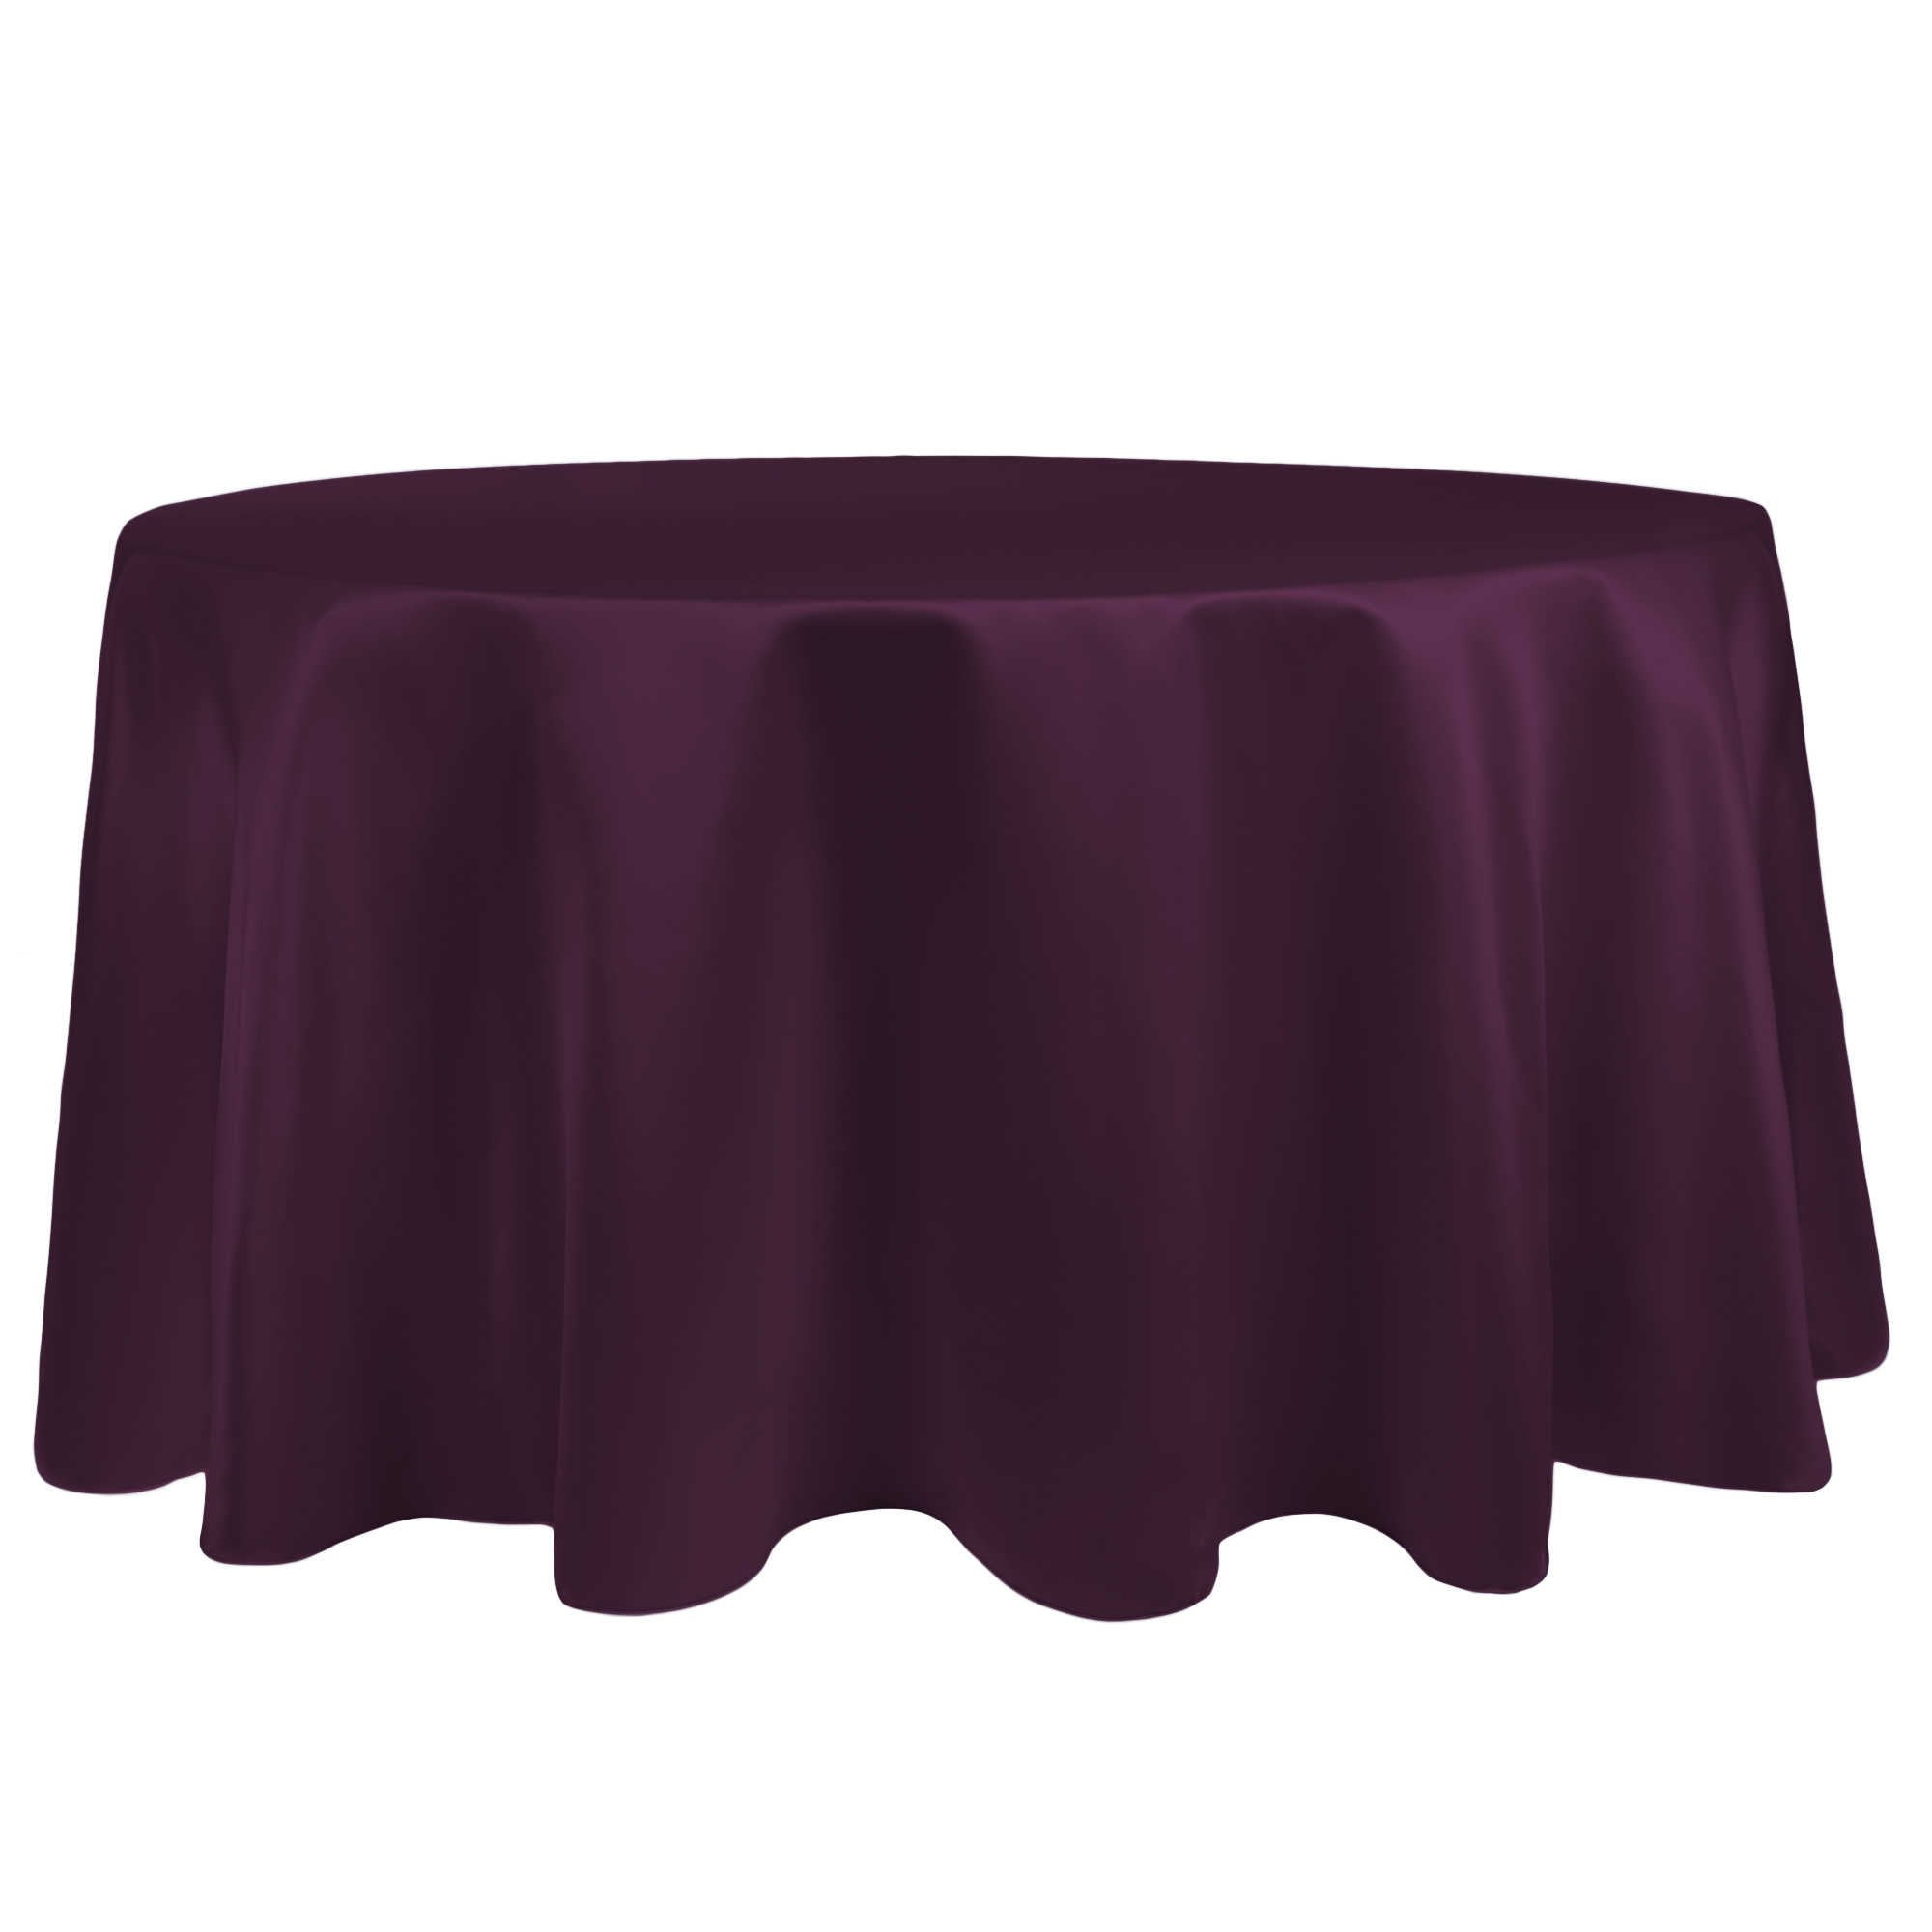 120" PURPLE Round Tablecloth Table Cover Wedding Banquet Event Cloth 